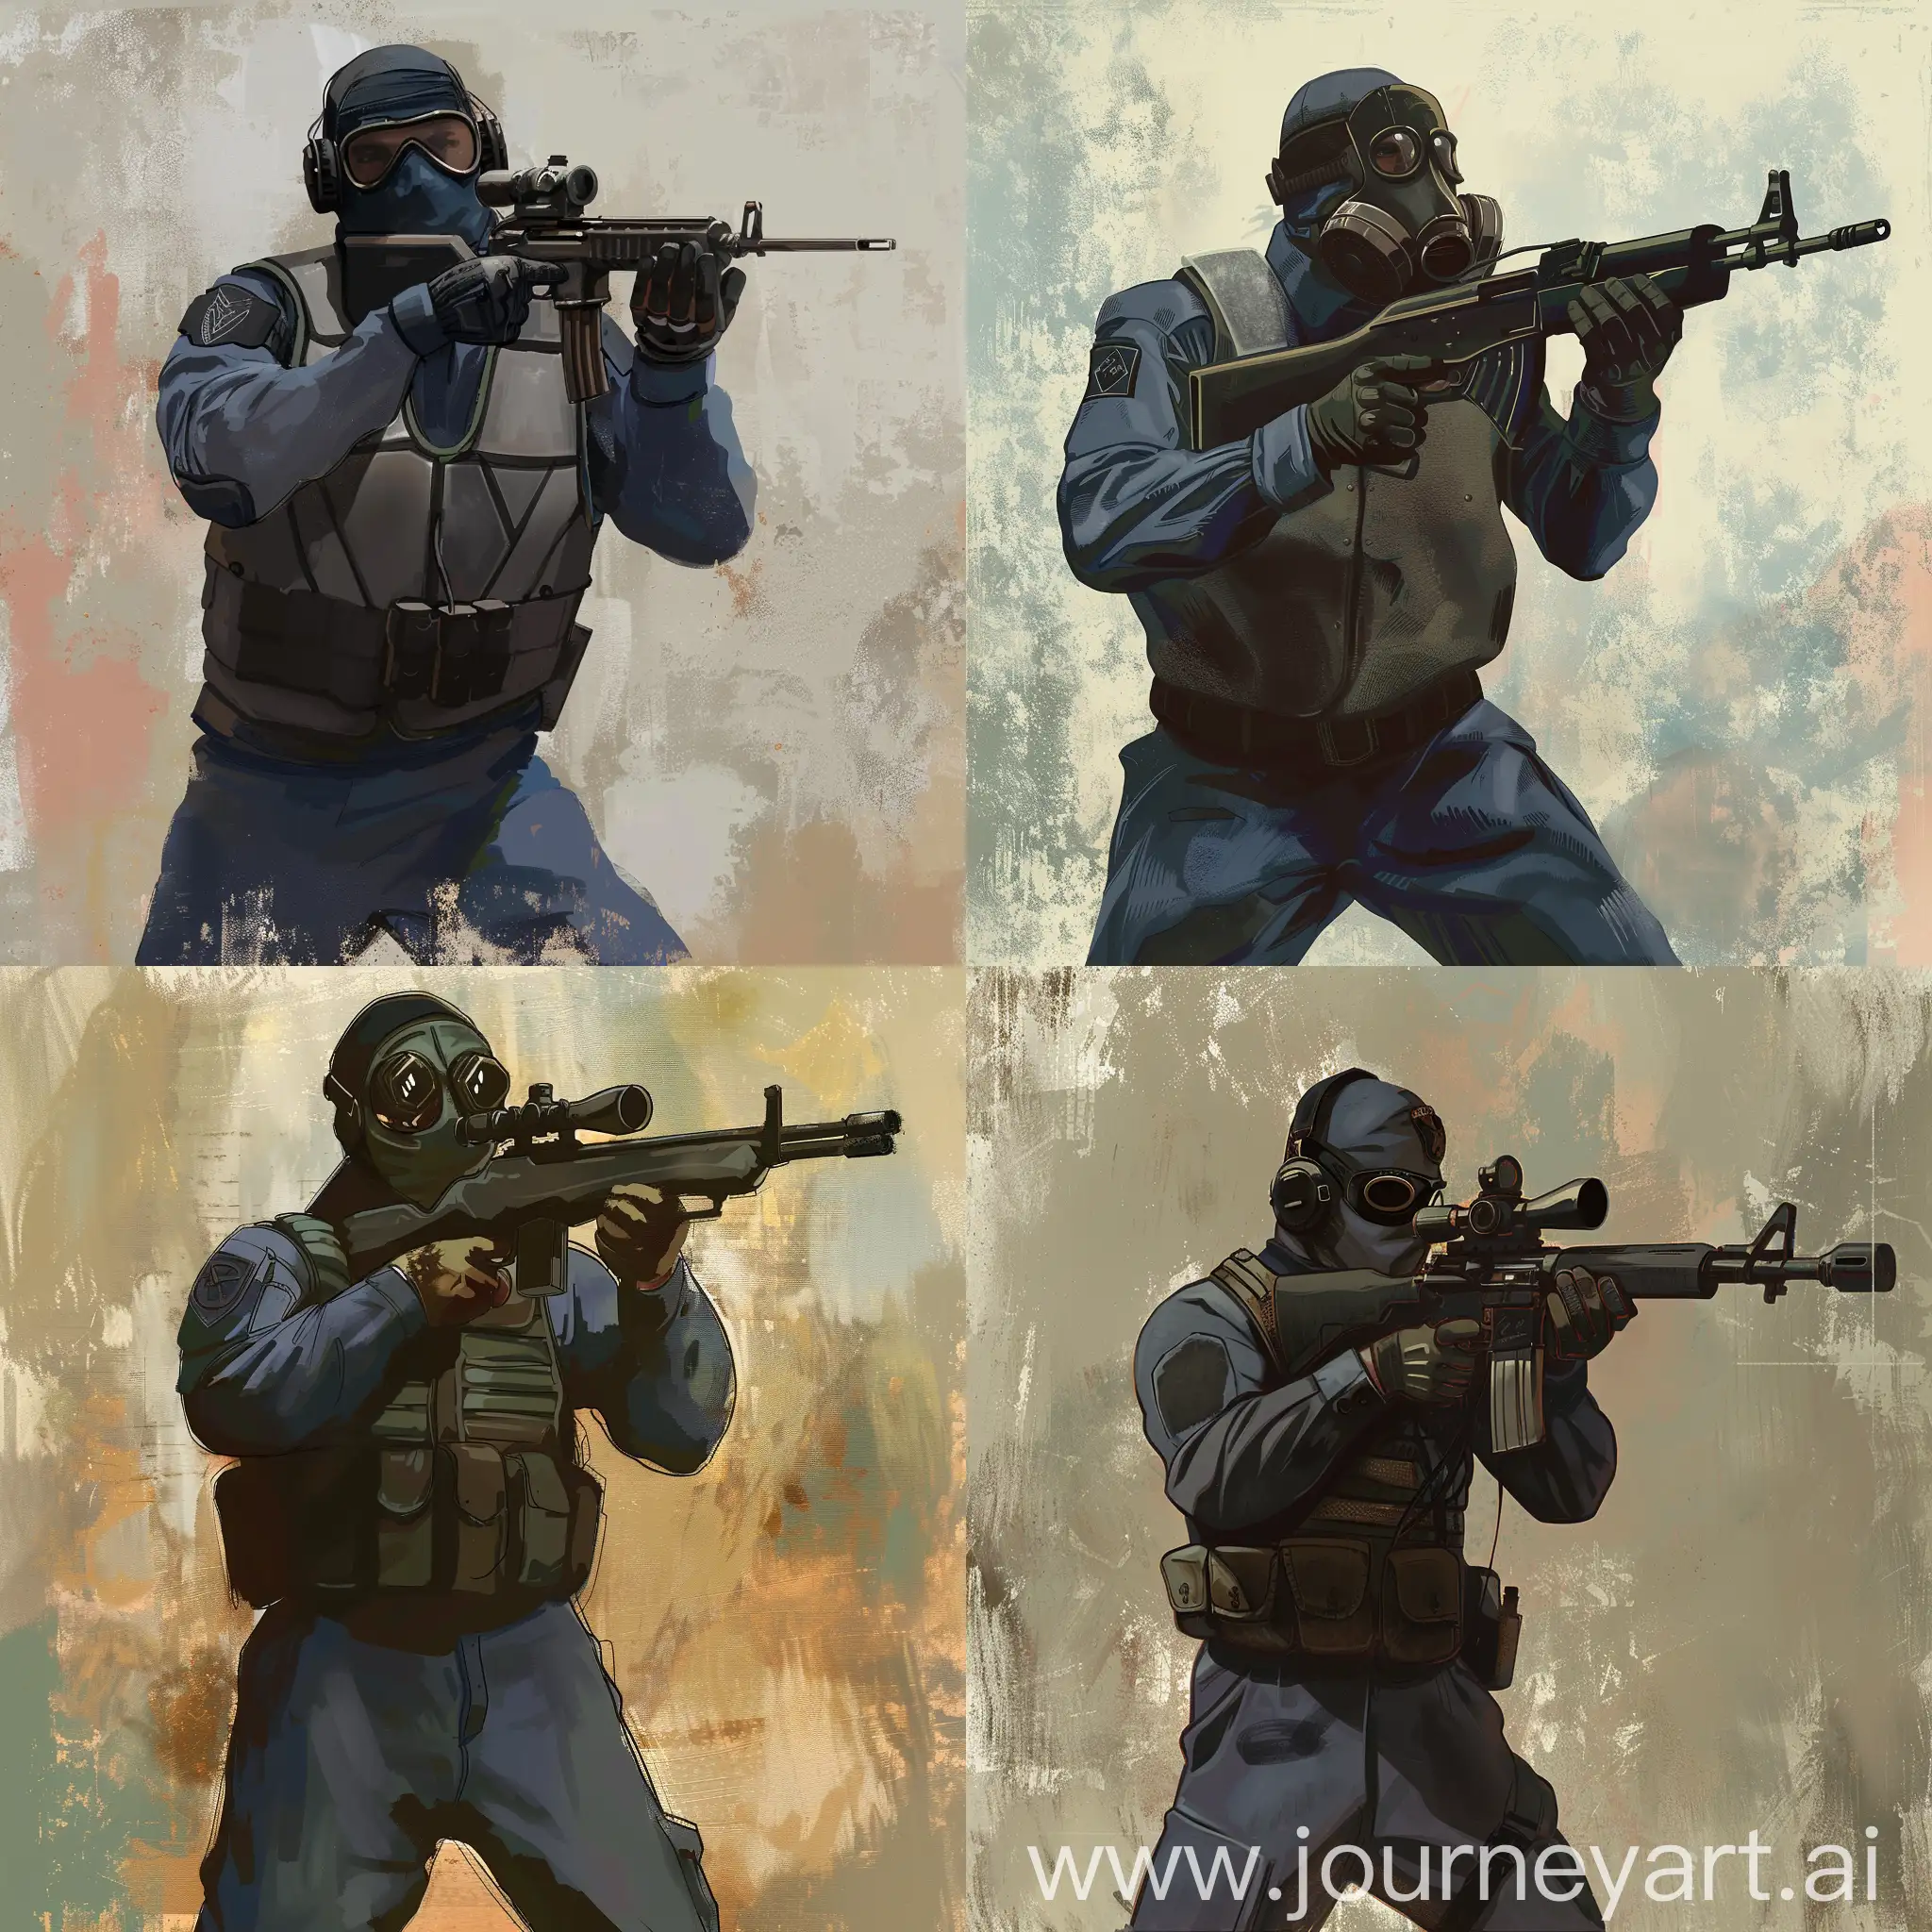 Concept art concept art, an American soldier of the Vietnam War in a bulletproof vest of that time, with a sniper rifle in his hands, a balaclava on his face, a gas mask on top of the balaclava of that time.